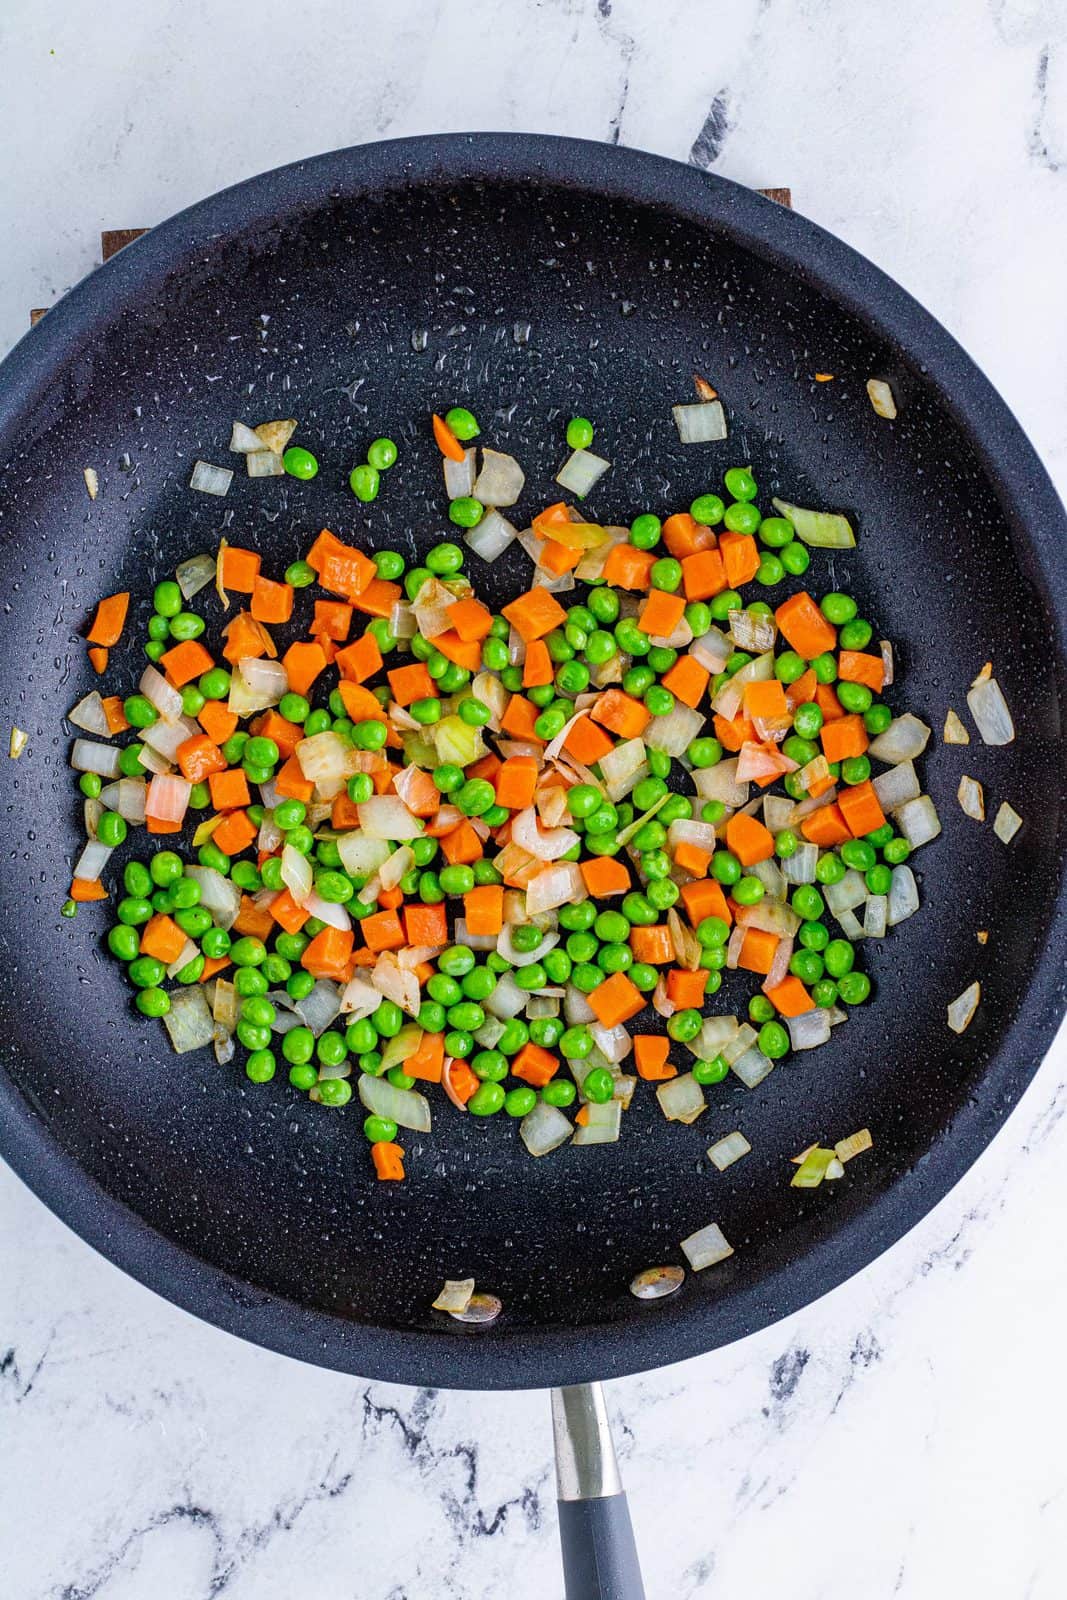 Onions, peas and carrots cooking in pan.